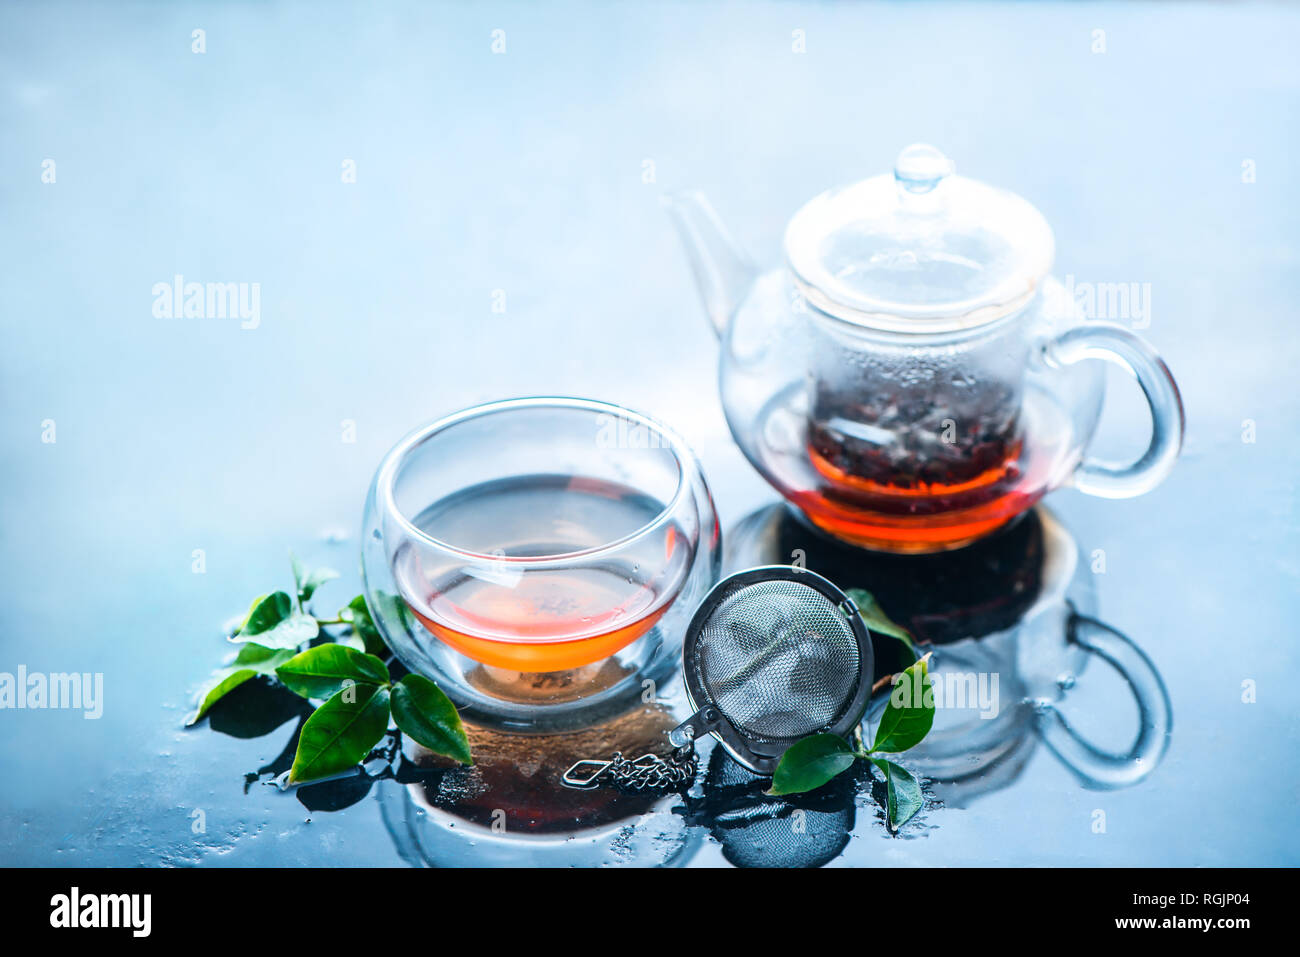 teapot and double wall glass with tea leaves clear and fresh image on a light blue background hot drinks with copy space RGJP04